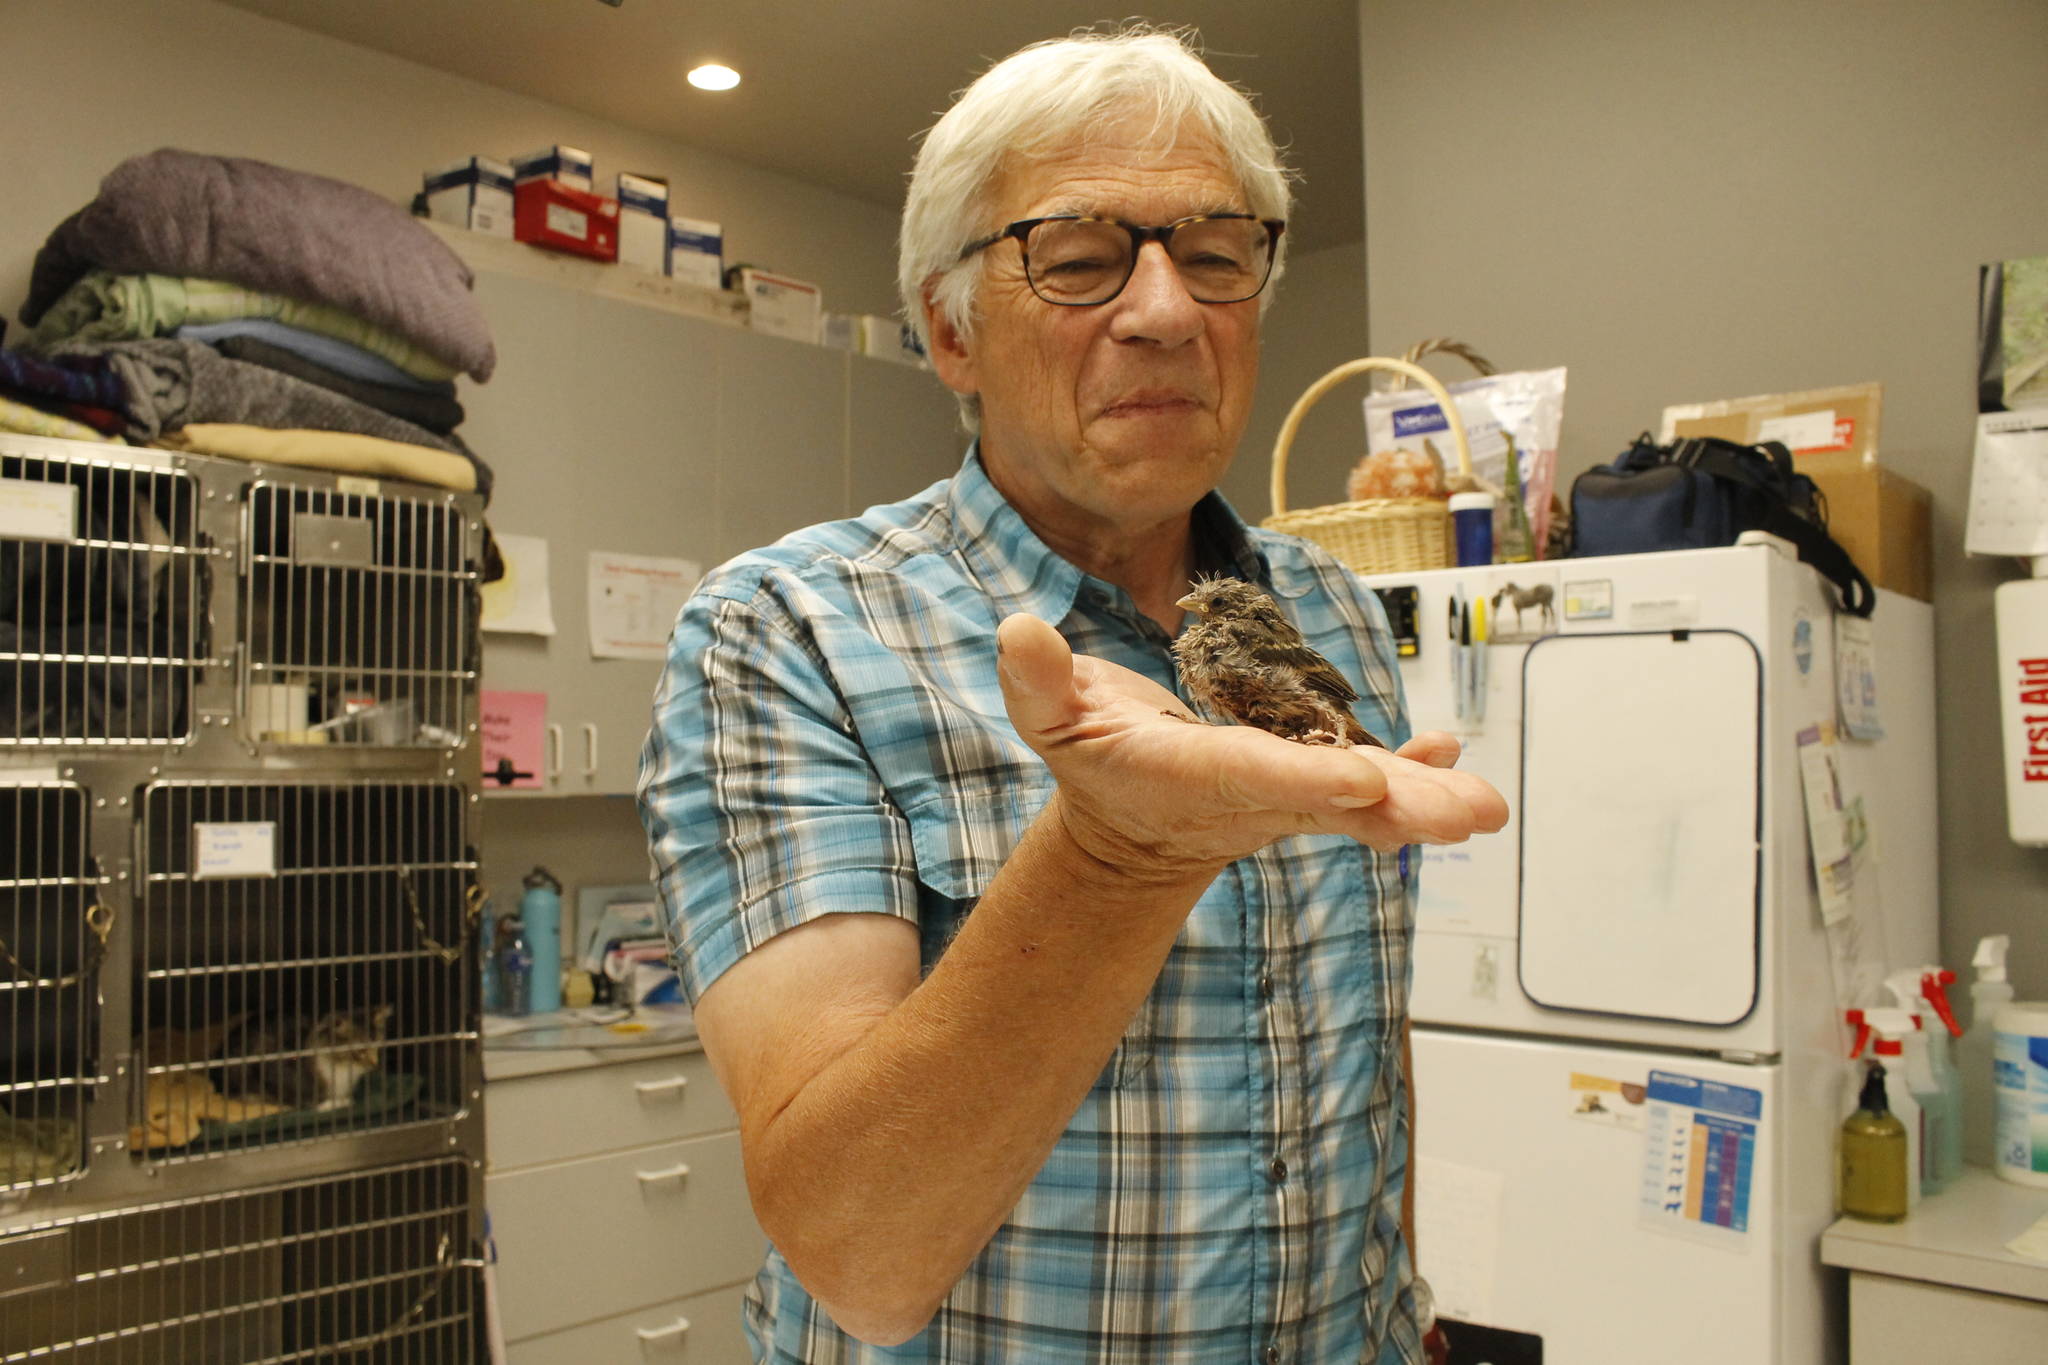 Veterinarian David Parent holds Jeffrey the house finch, who is receiving treatment after falling out of the nest. (Photo by Kira Erickson/South Whidbey Record)